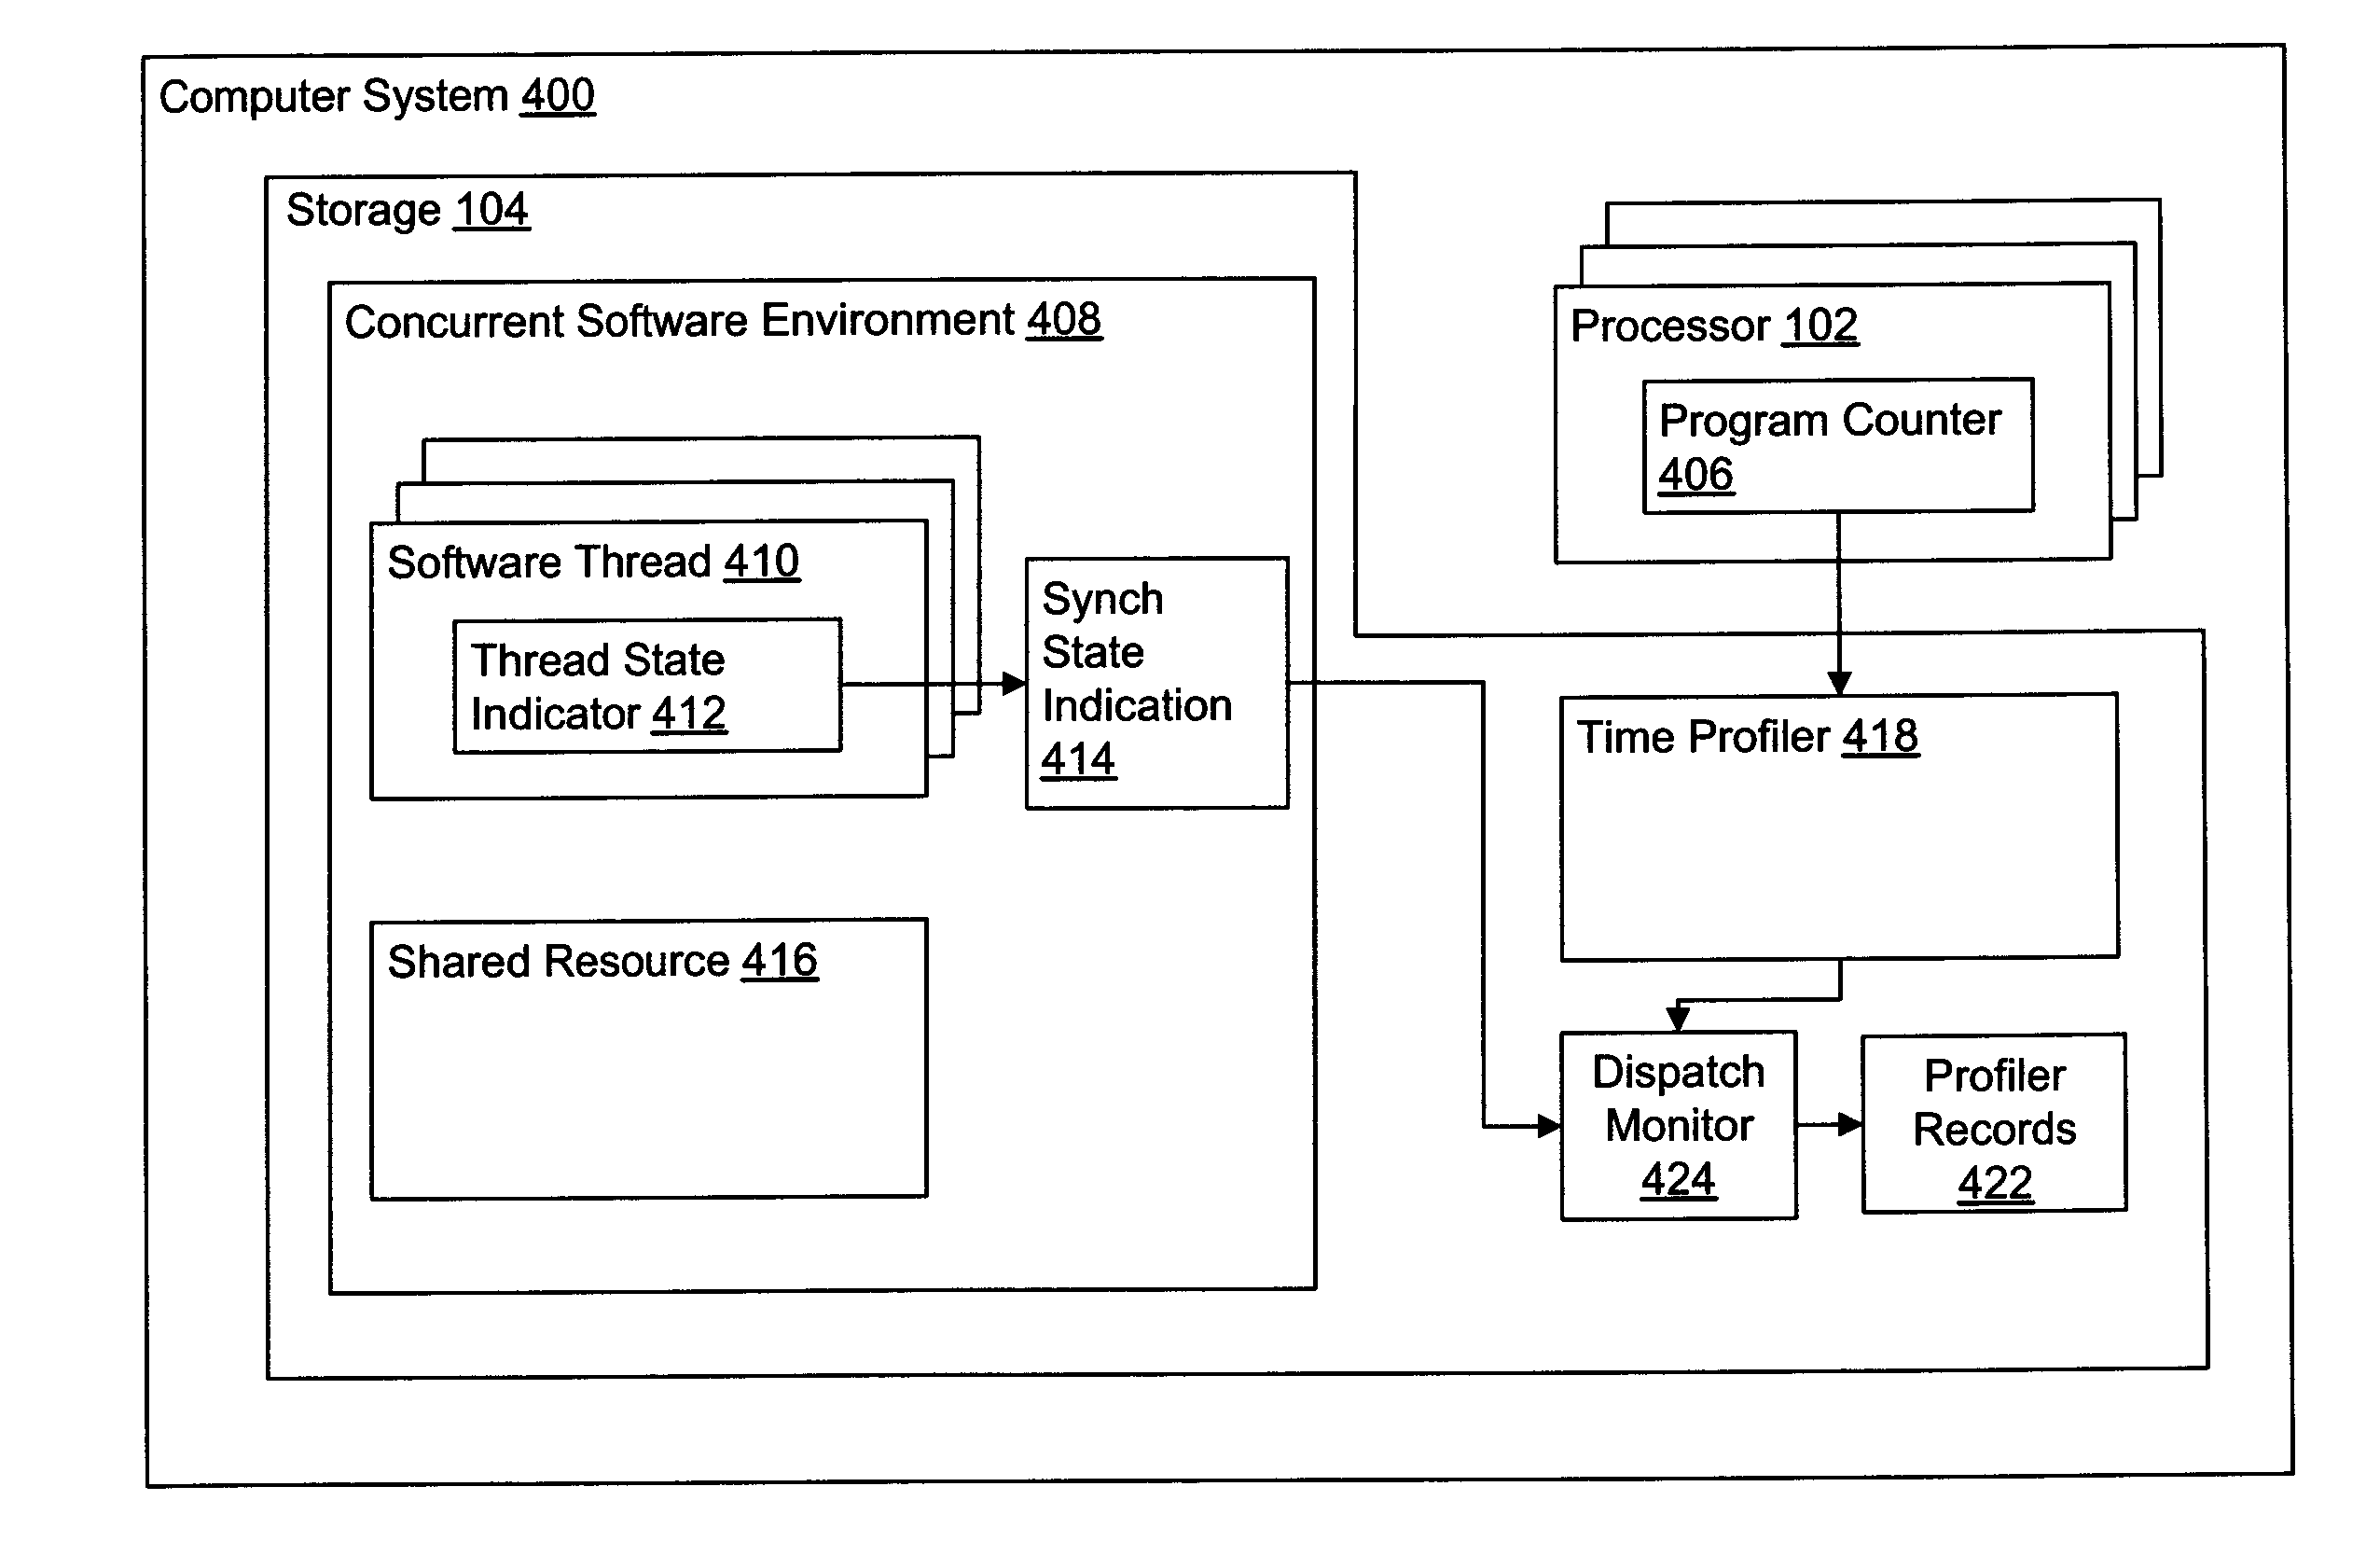 Activity Recording System for a Concurrent Software Environment